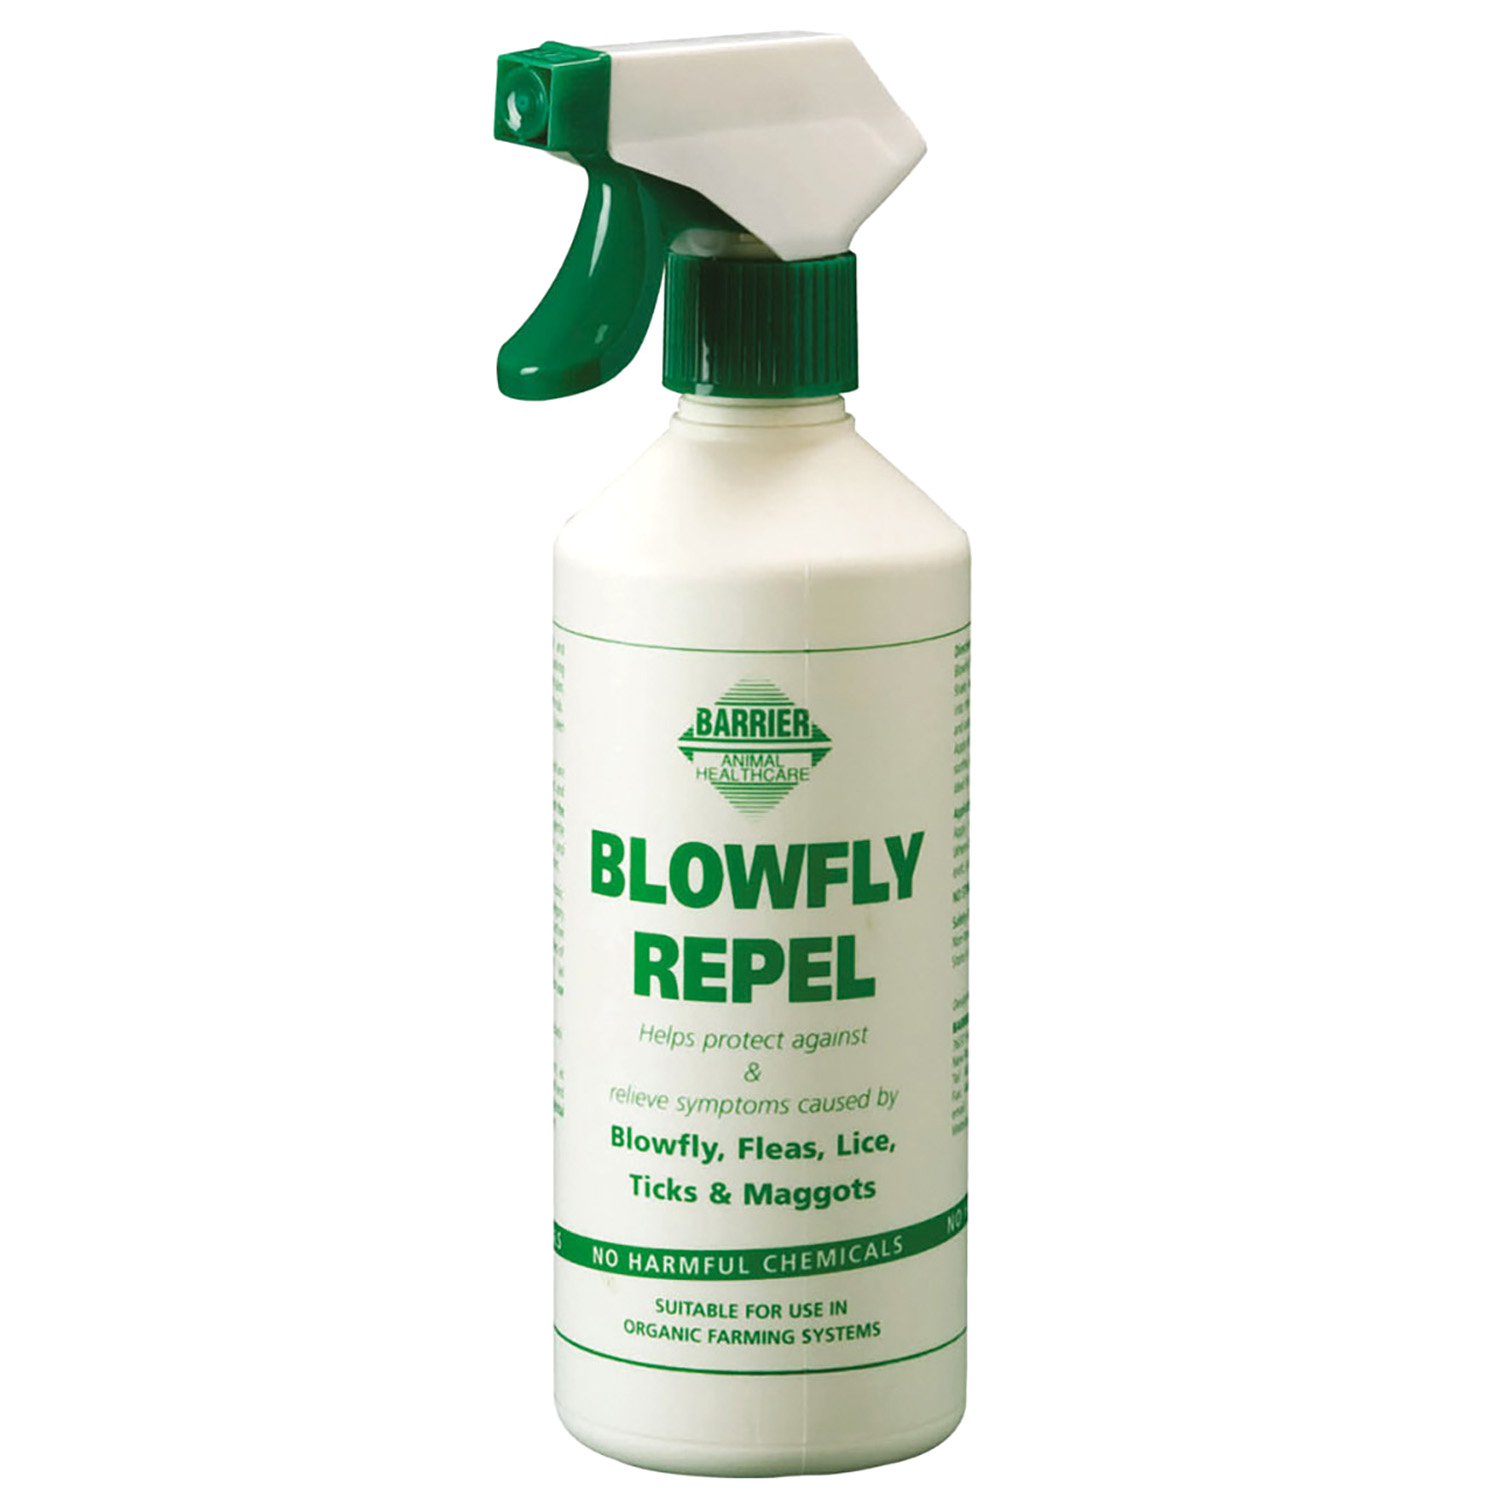 BARRIER BLOWFLY REPEL FOR SHEEP BARRIER BLOWFLY REPEL FOR SHEEP 500 ML